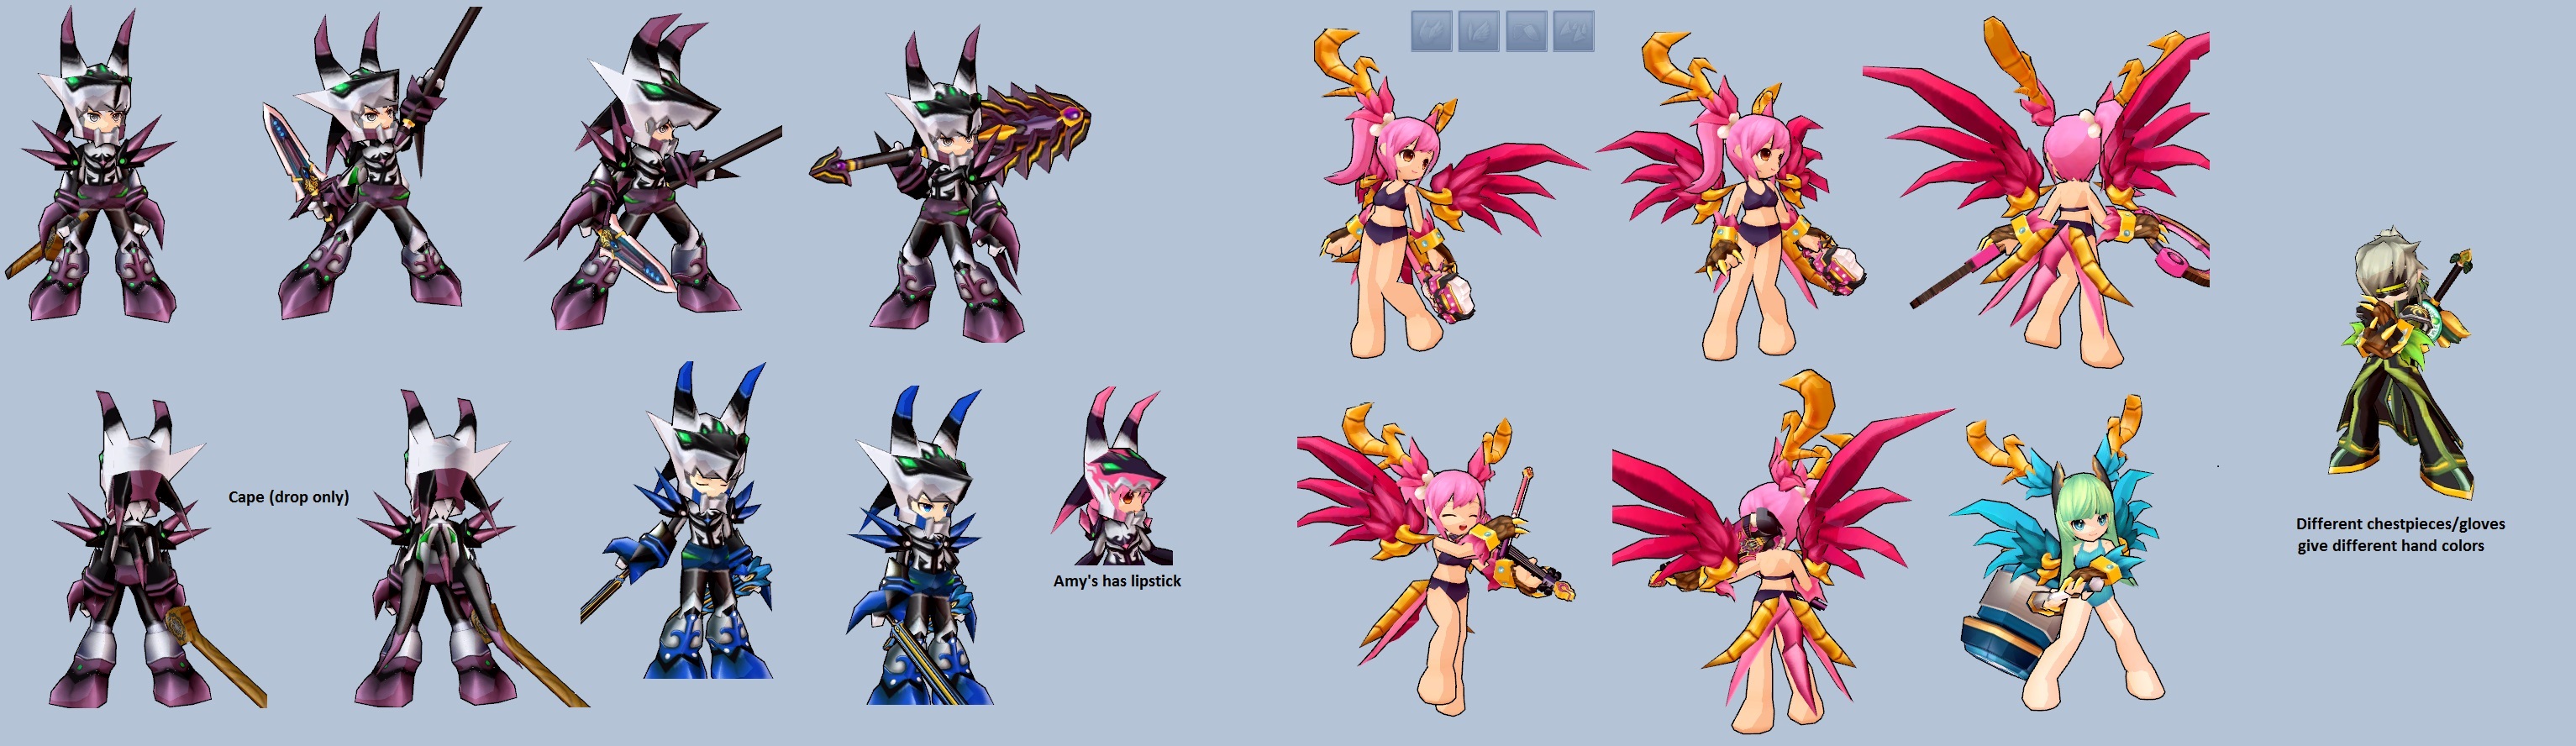 Zenia, Level 1 Demon Lord and One Room Hero Wiki